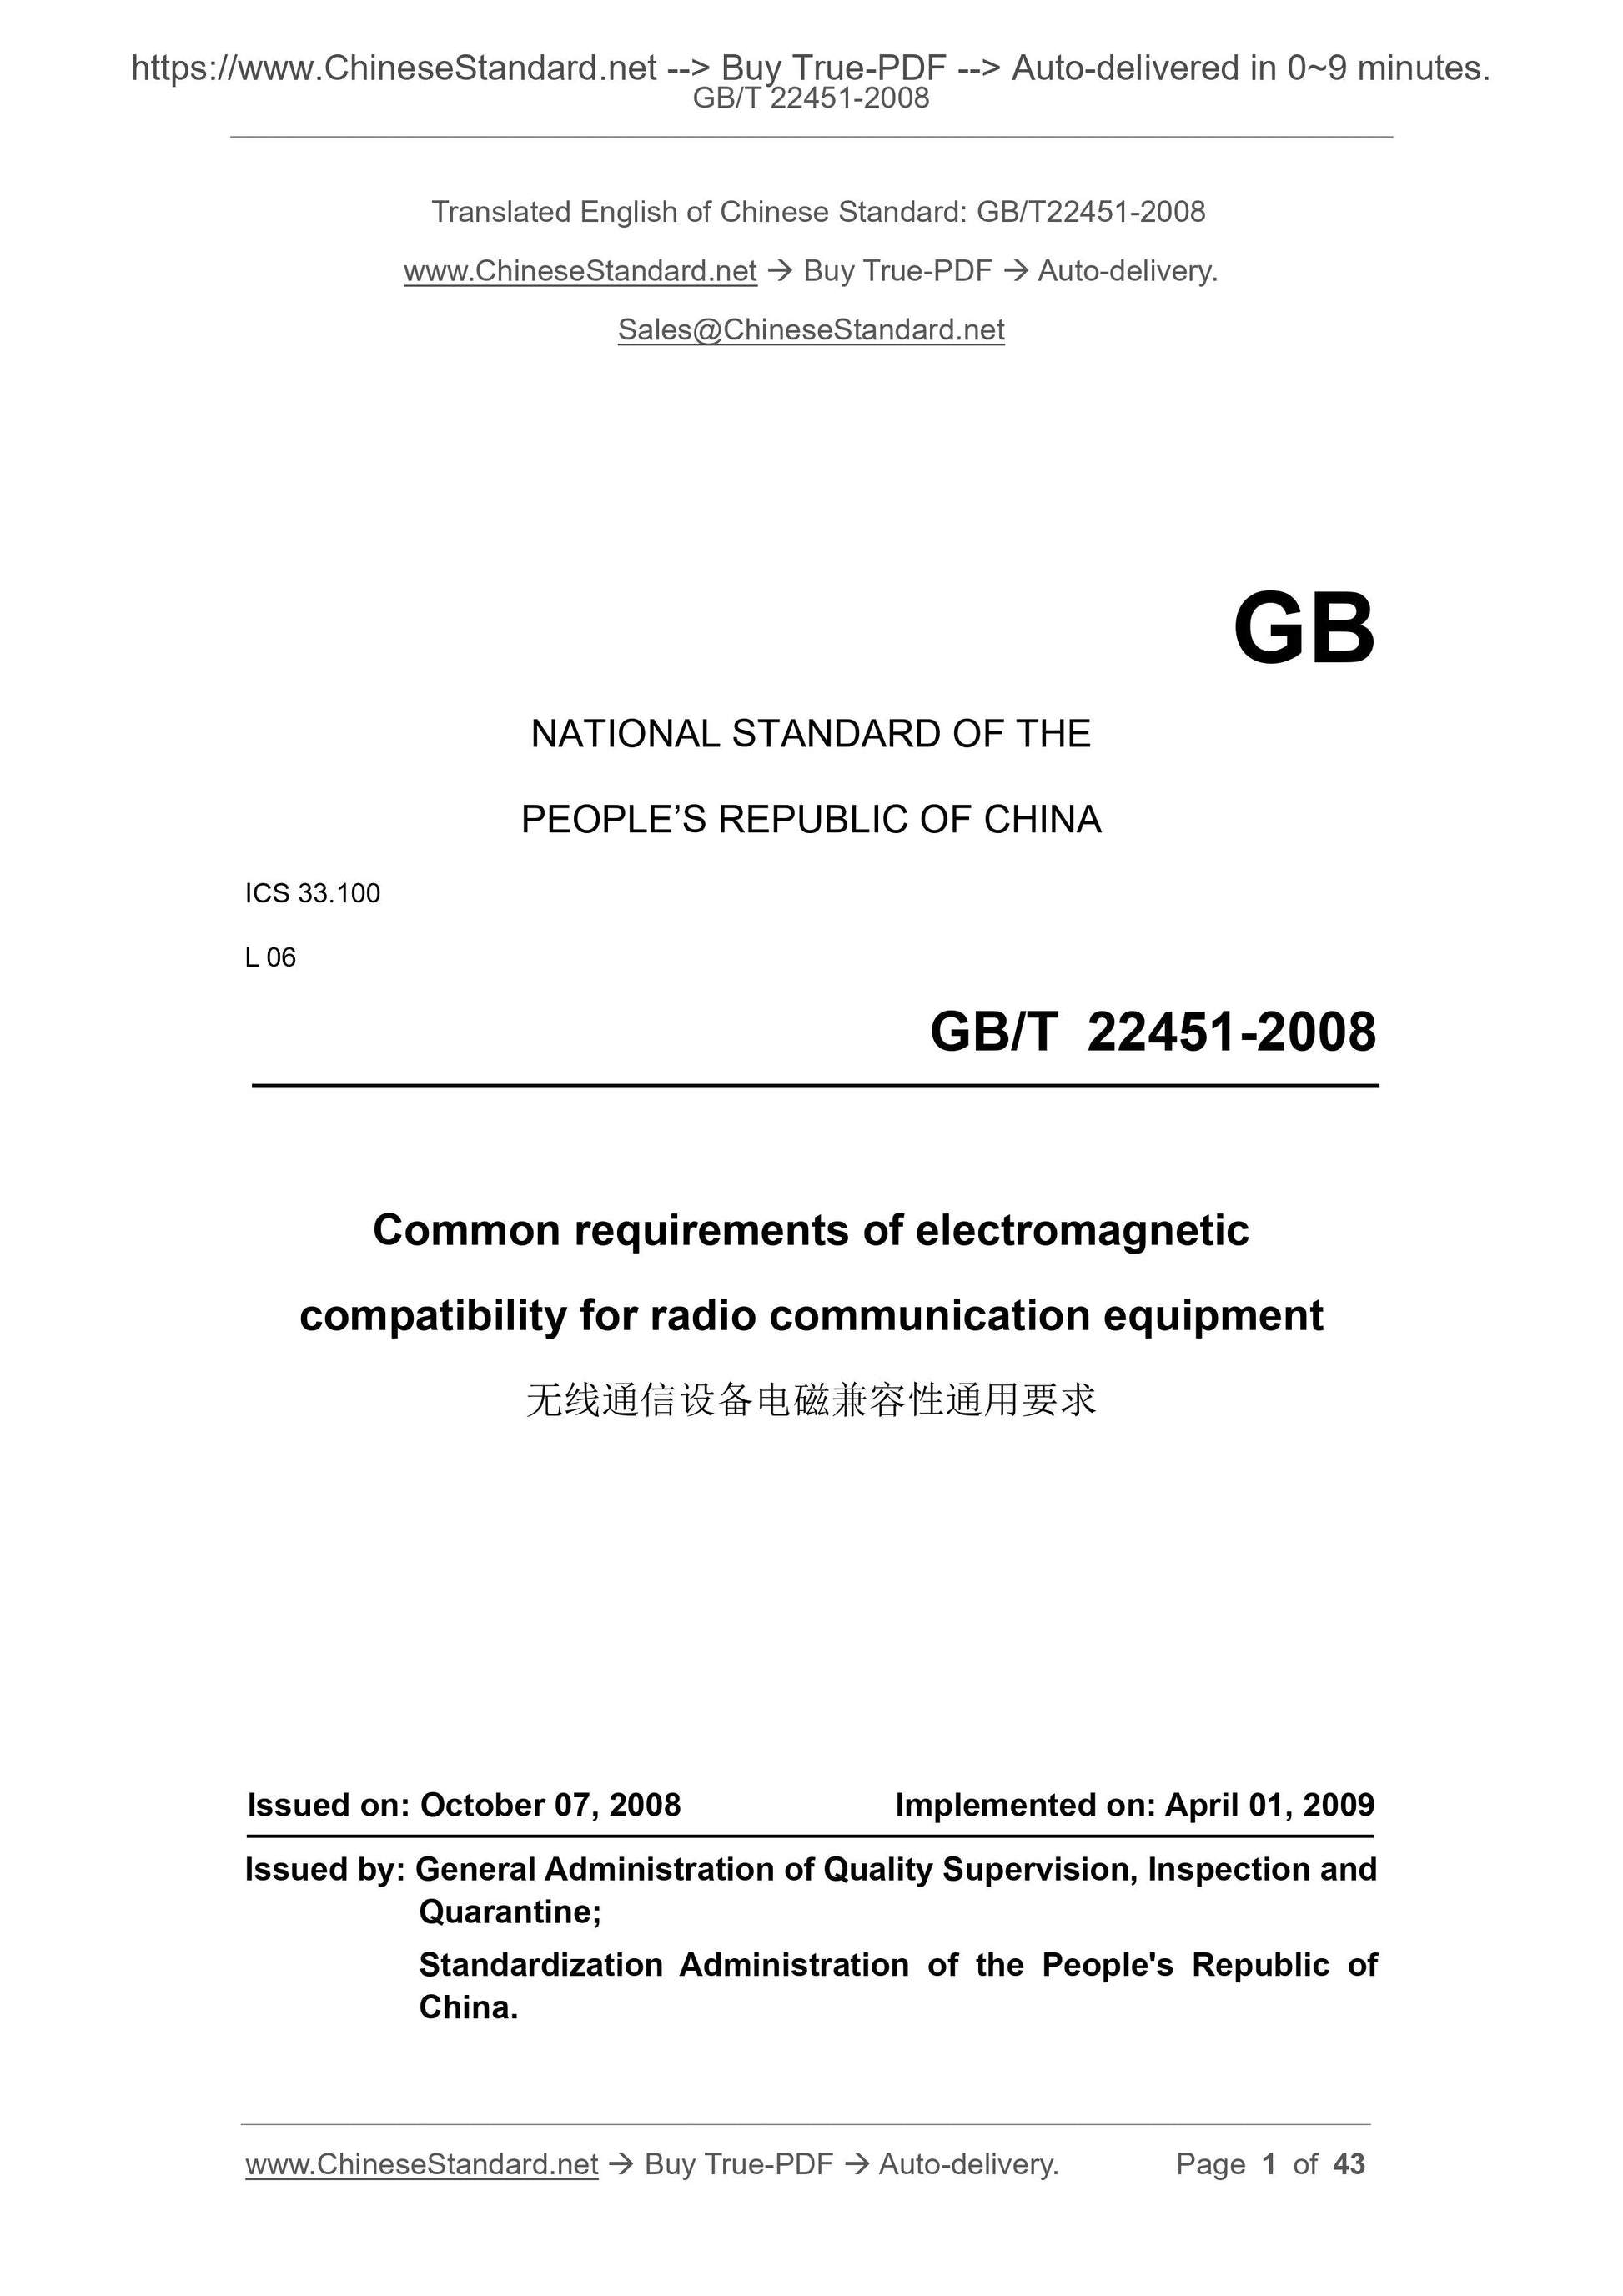 GB/T 22451-2008 Page 1